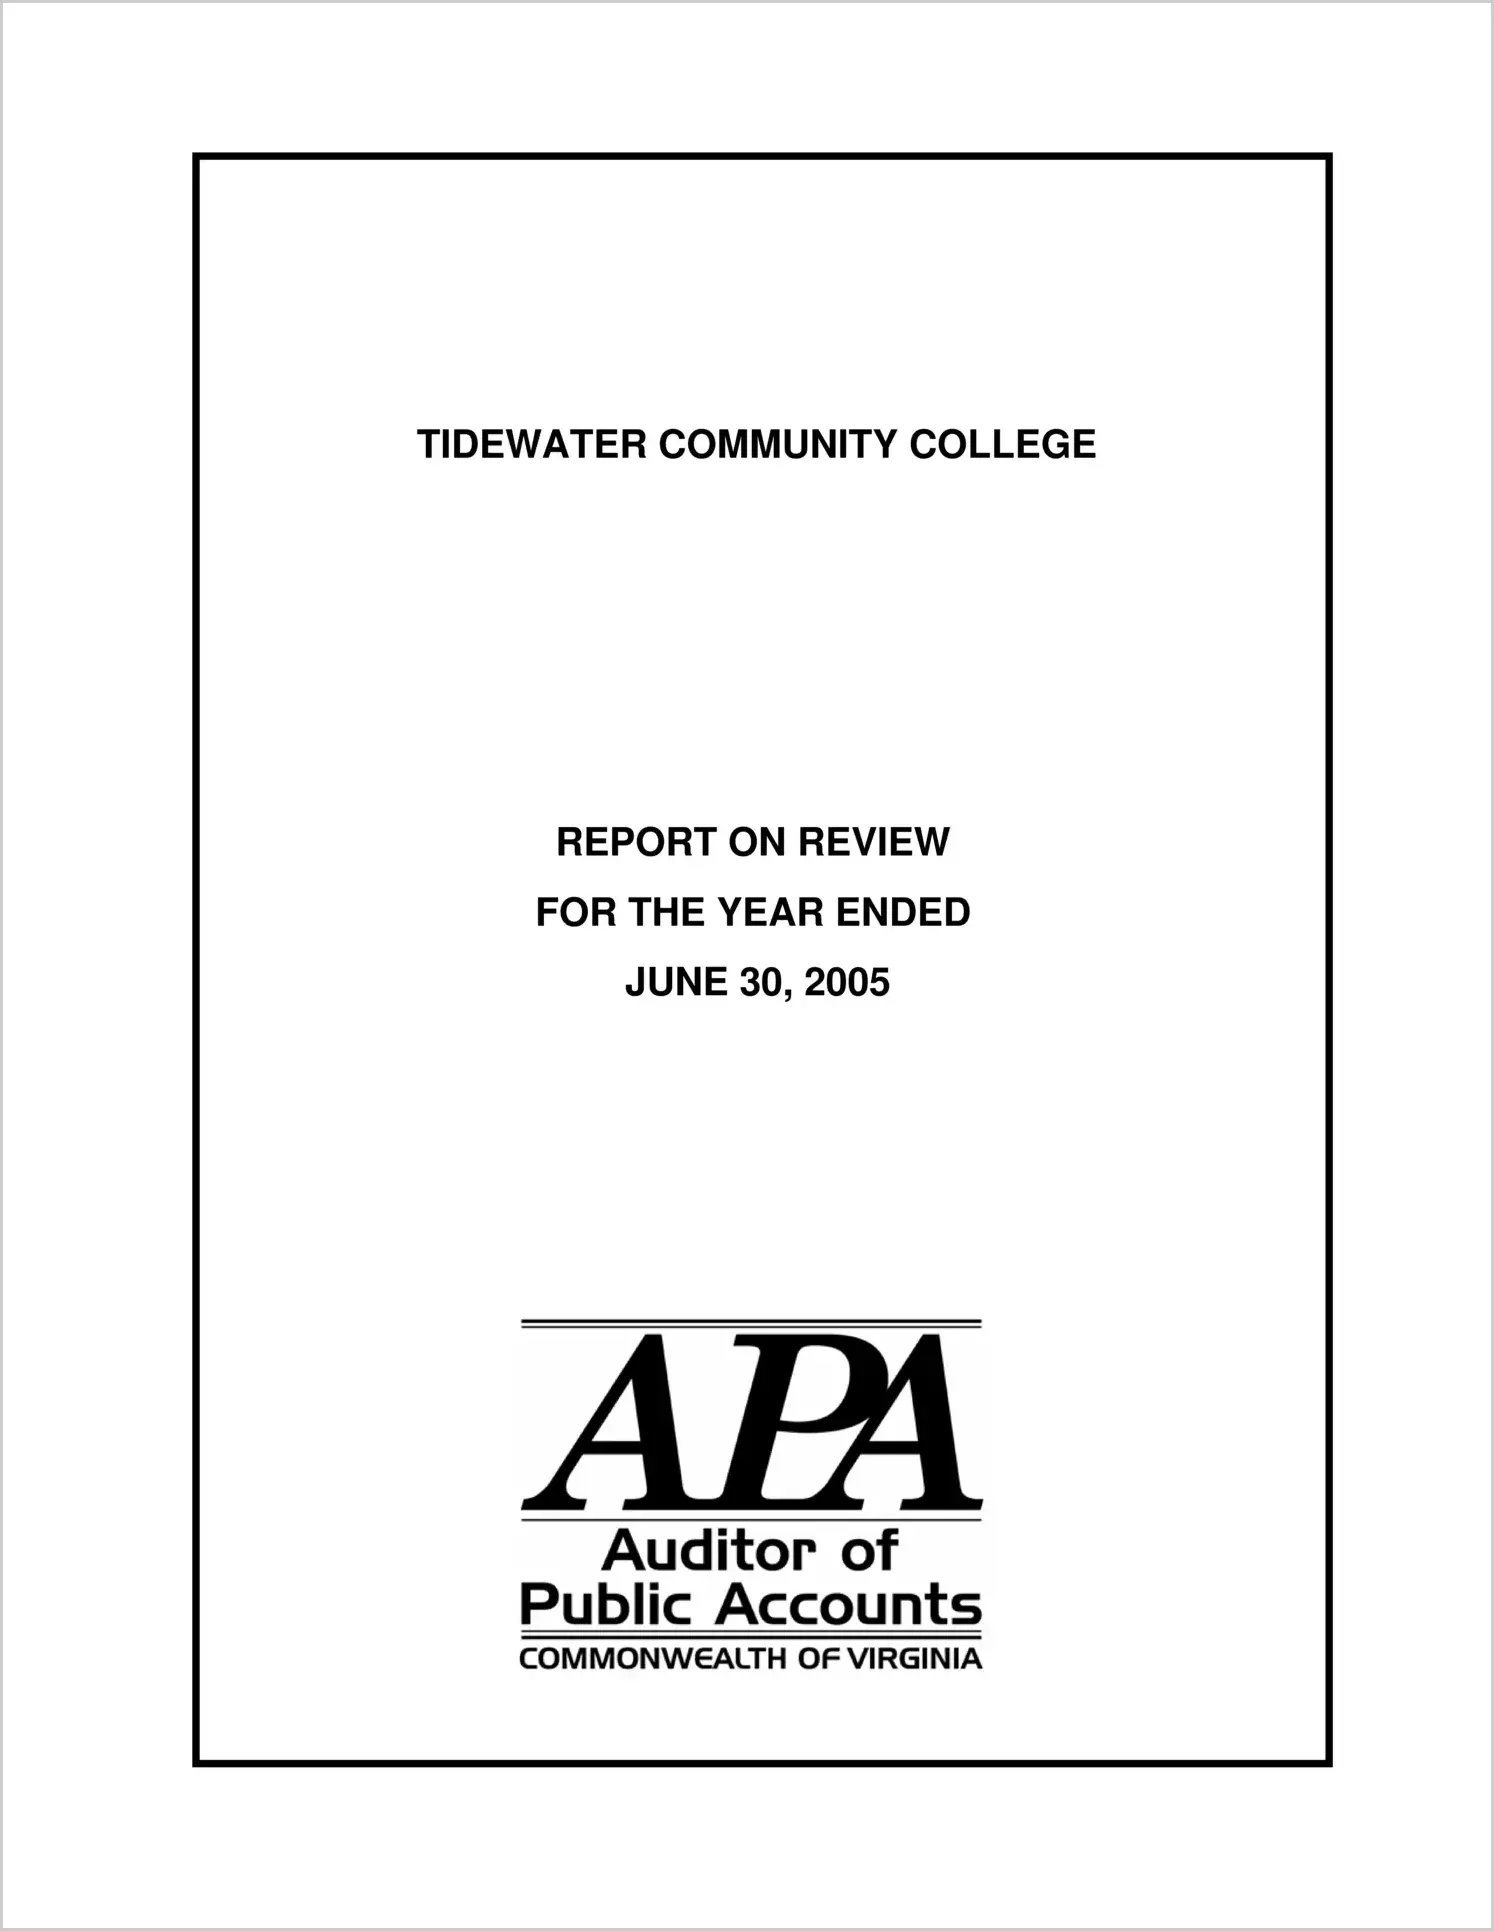 Tidewater Community College Report on review for the year ended June 30, 2005